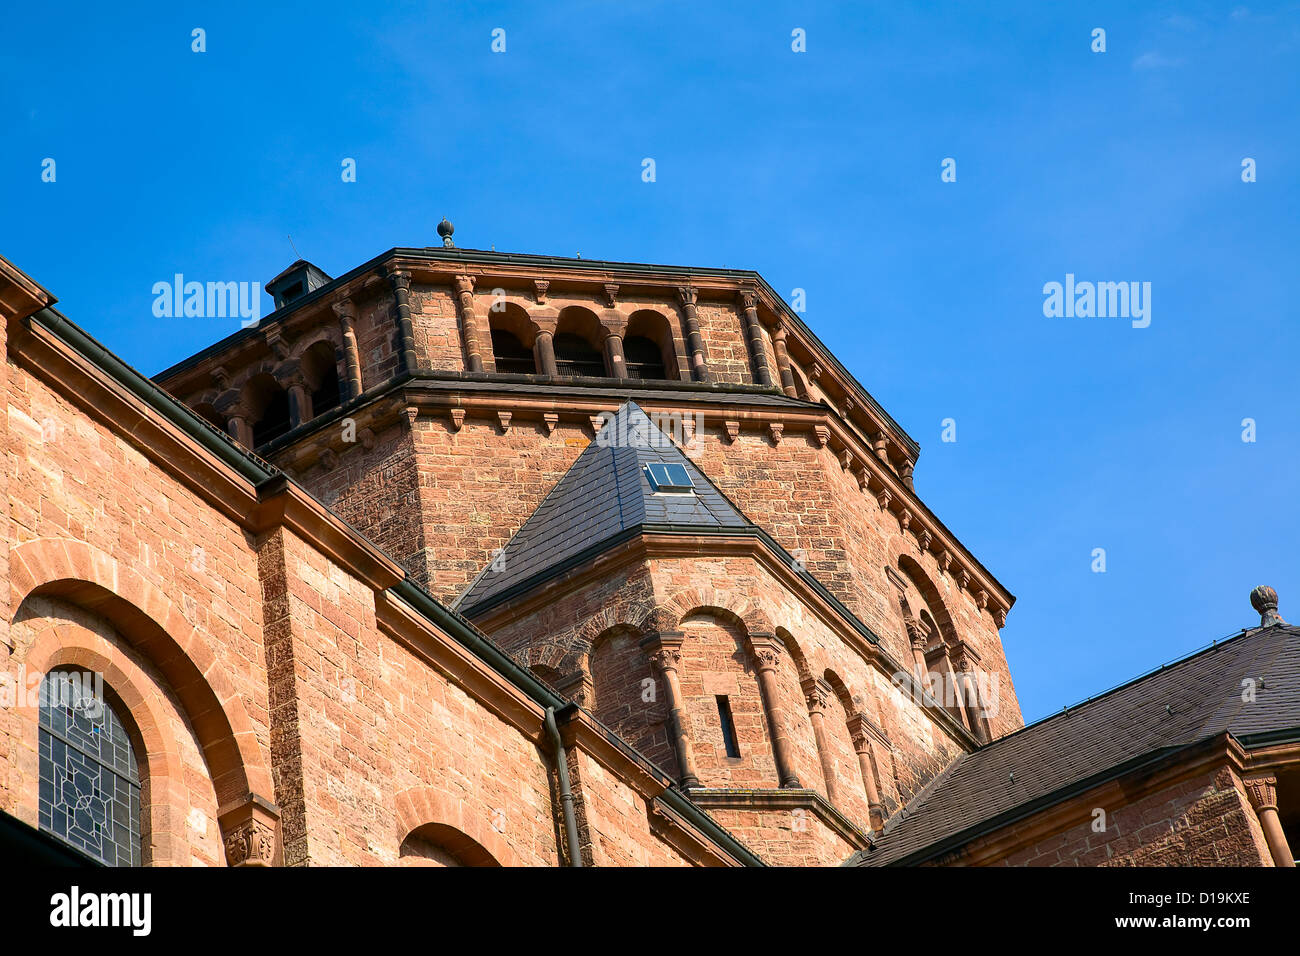 The church in city Dillingen in a sunny morning, Saarland / Germany Stock Photo